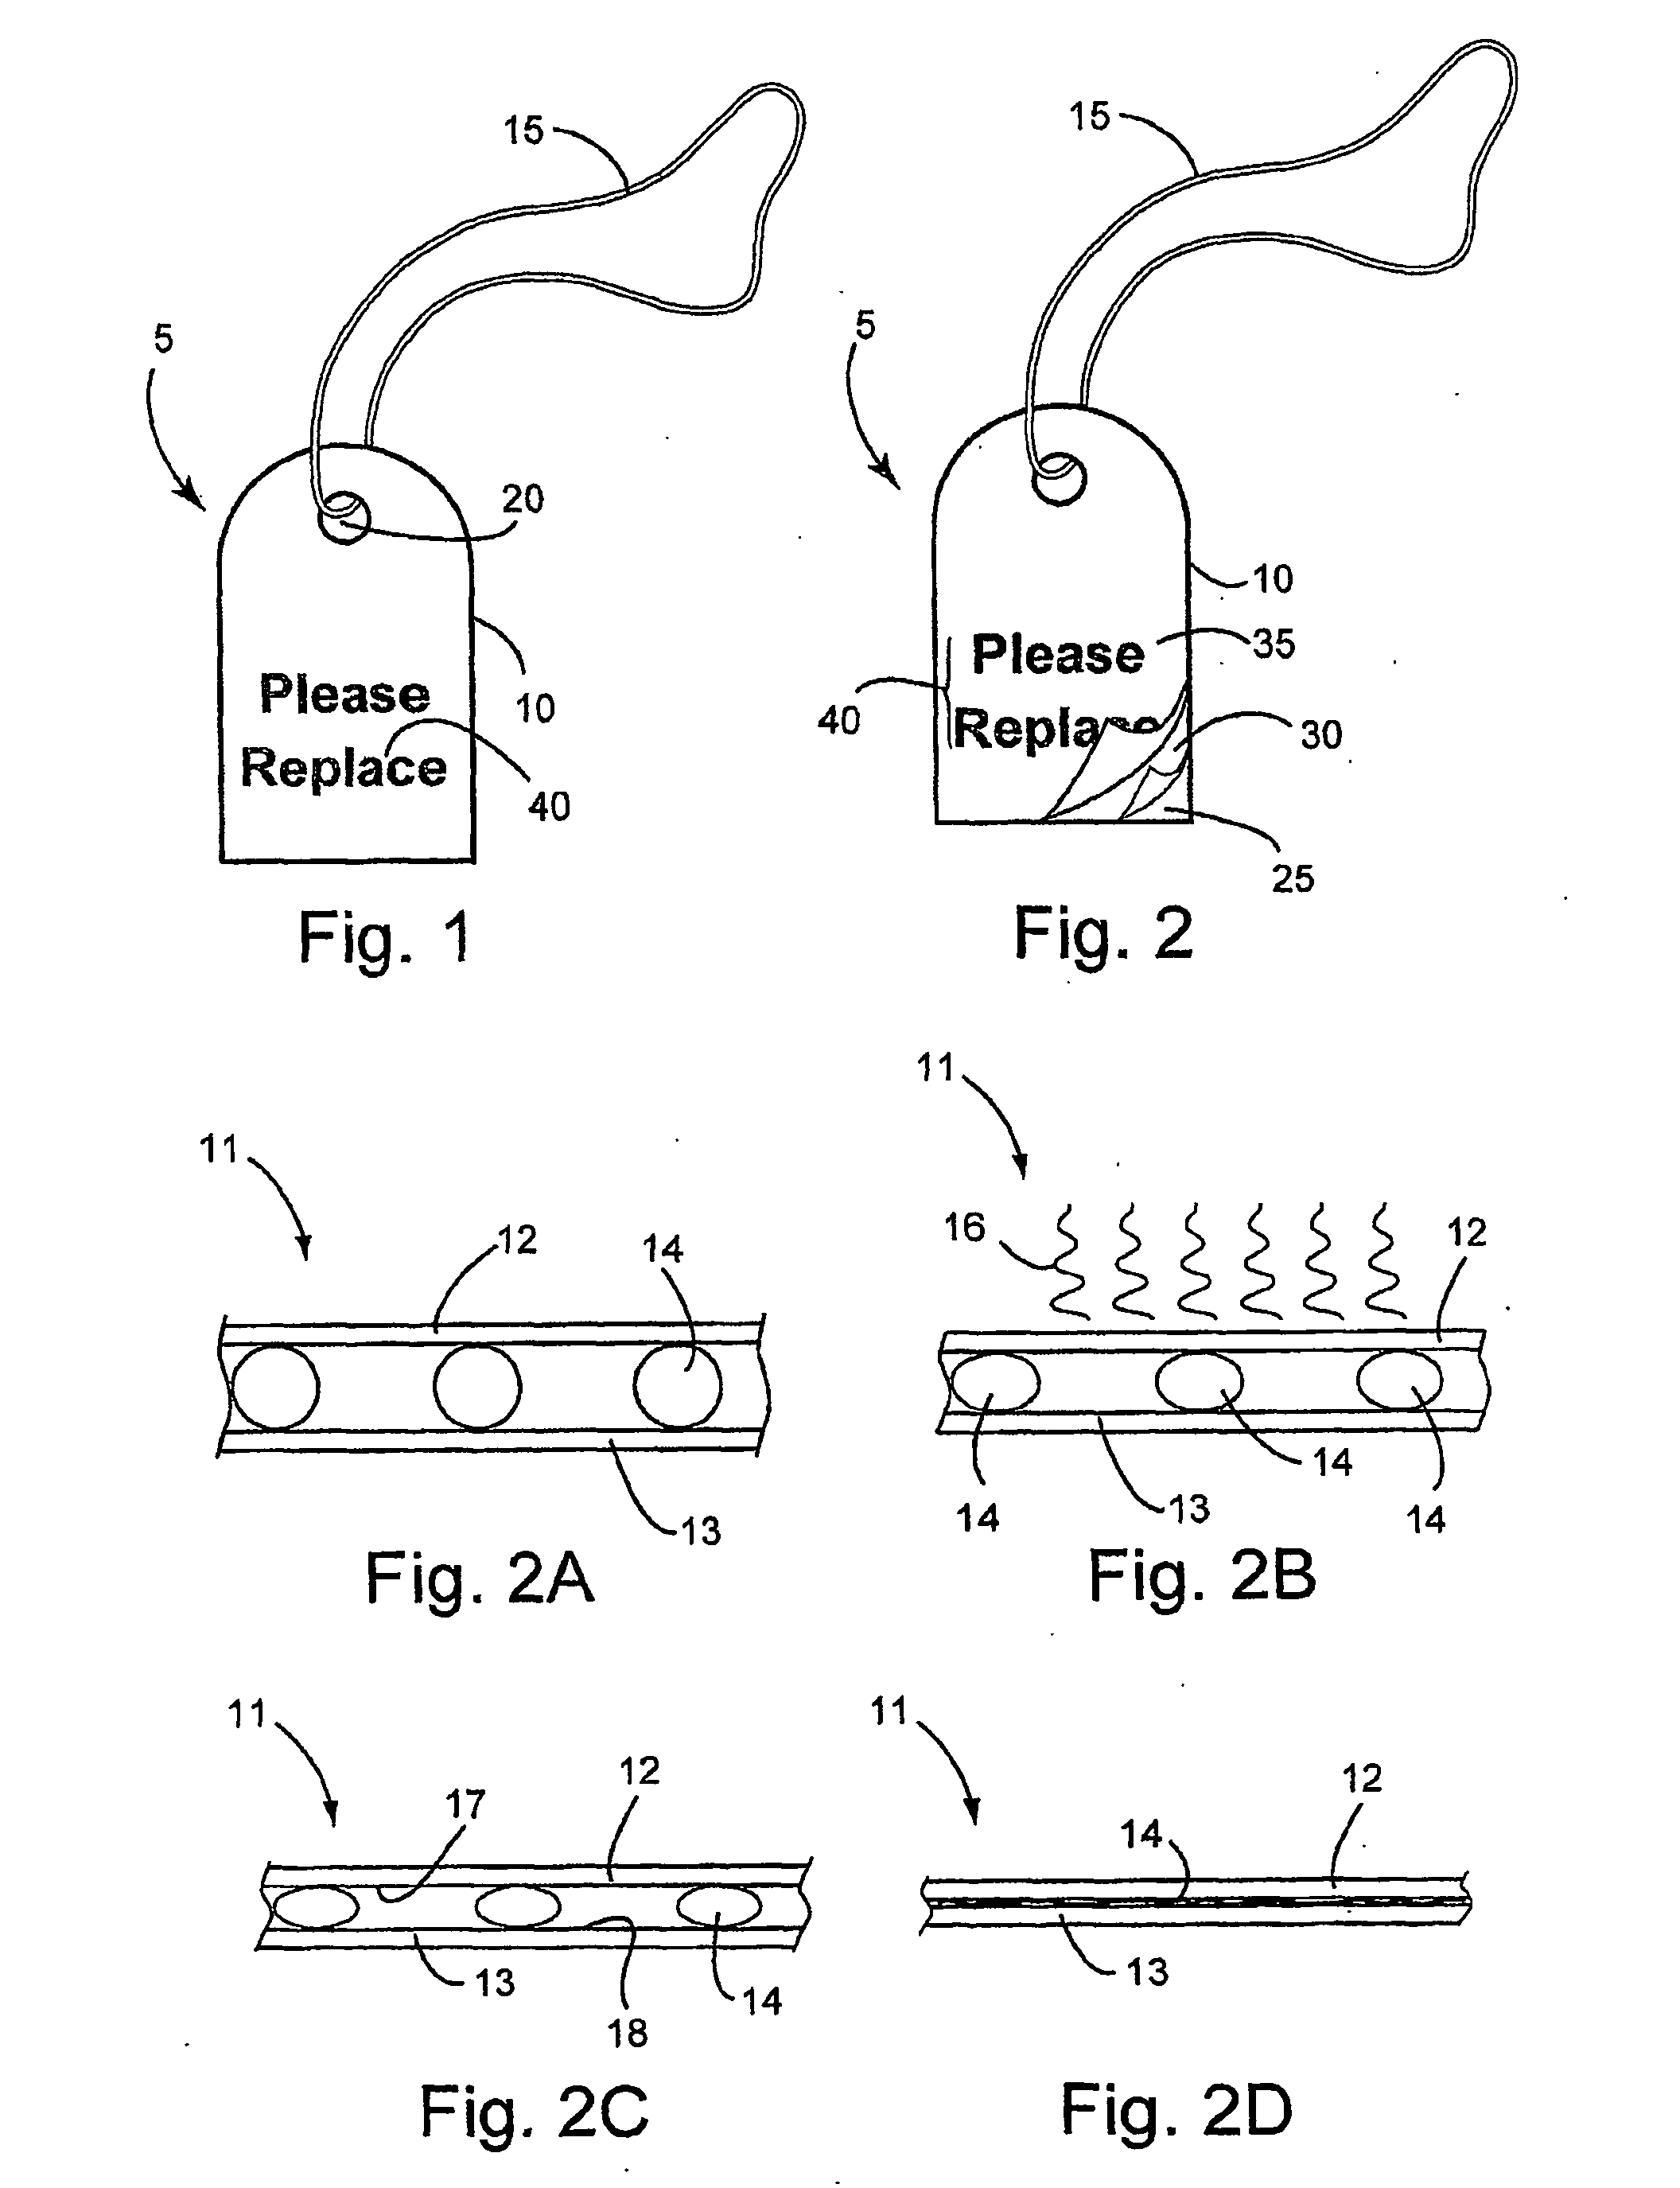 Method and Apparatus for Reminding user to Replace and/or Service Cpap Apparatus and/or Component Thereof